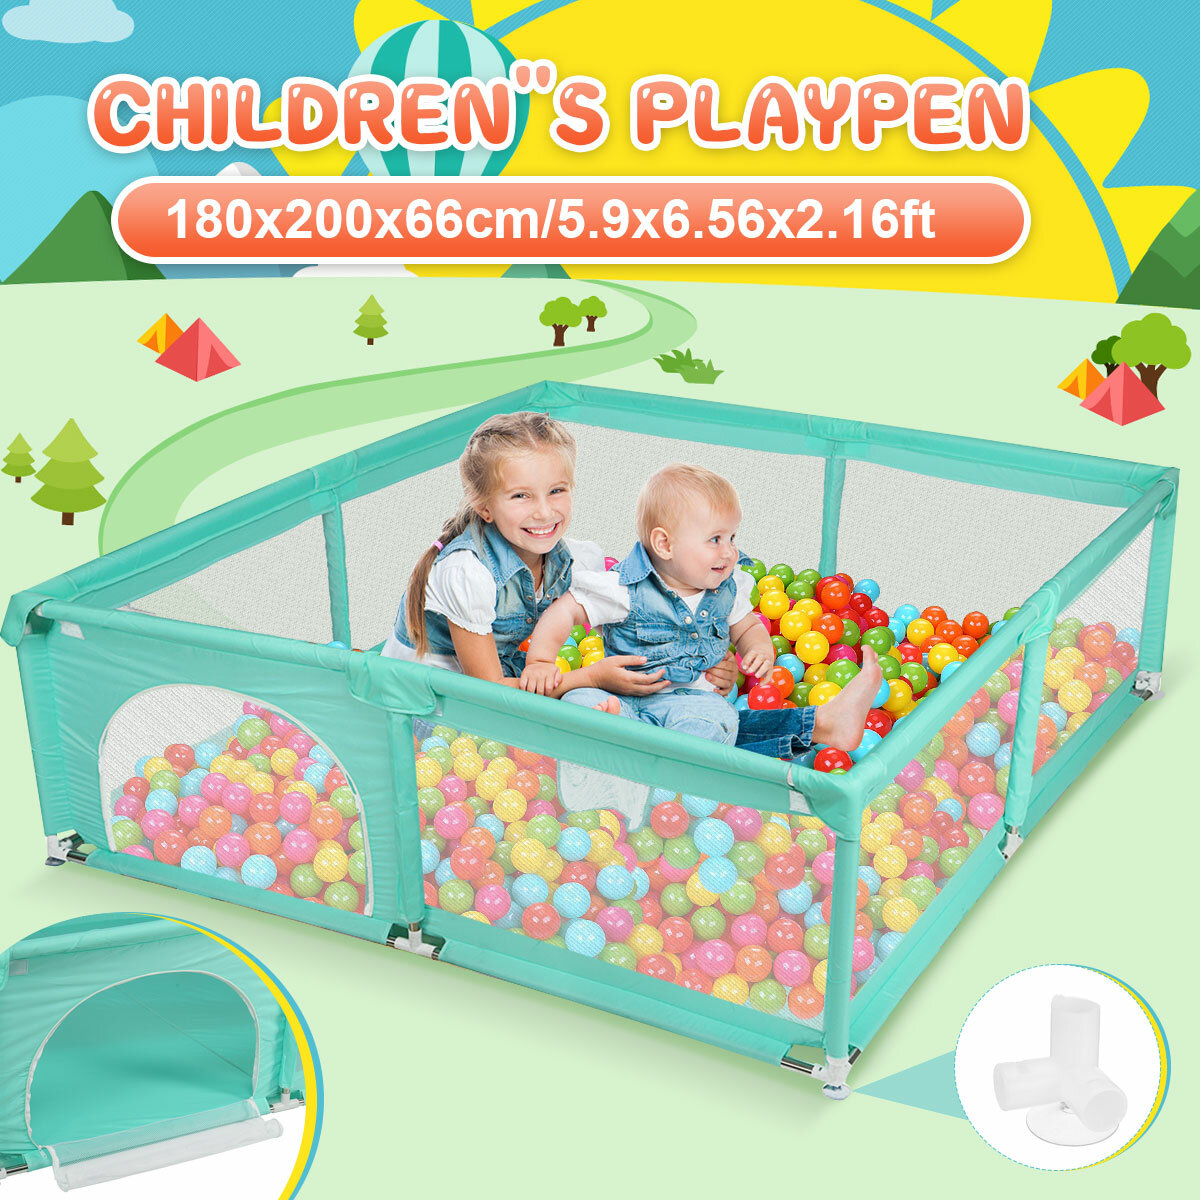 Baby Playpen Interactive Safety Indoor Gate Play Yards Tent Court Kids Furniture for Children Large Dry Pool Playground